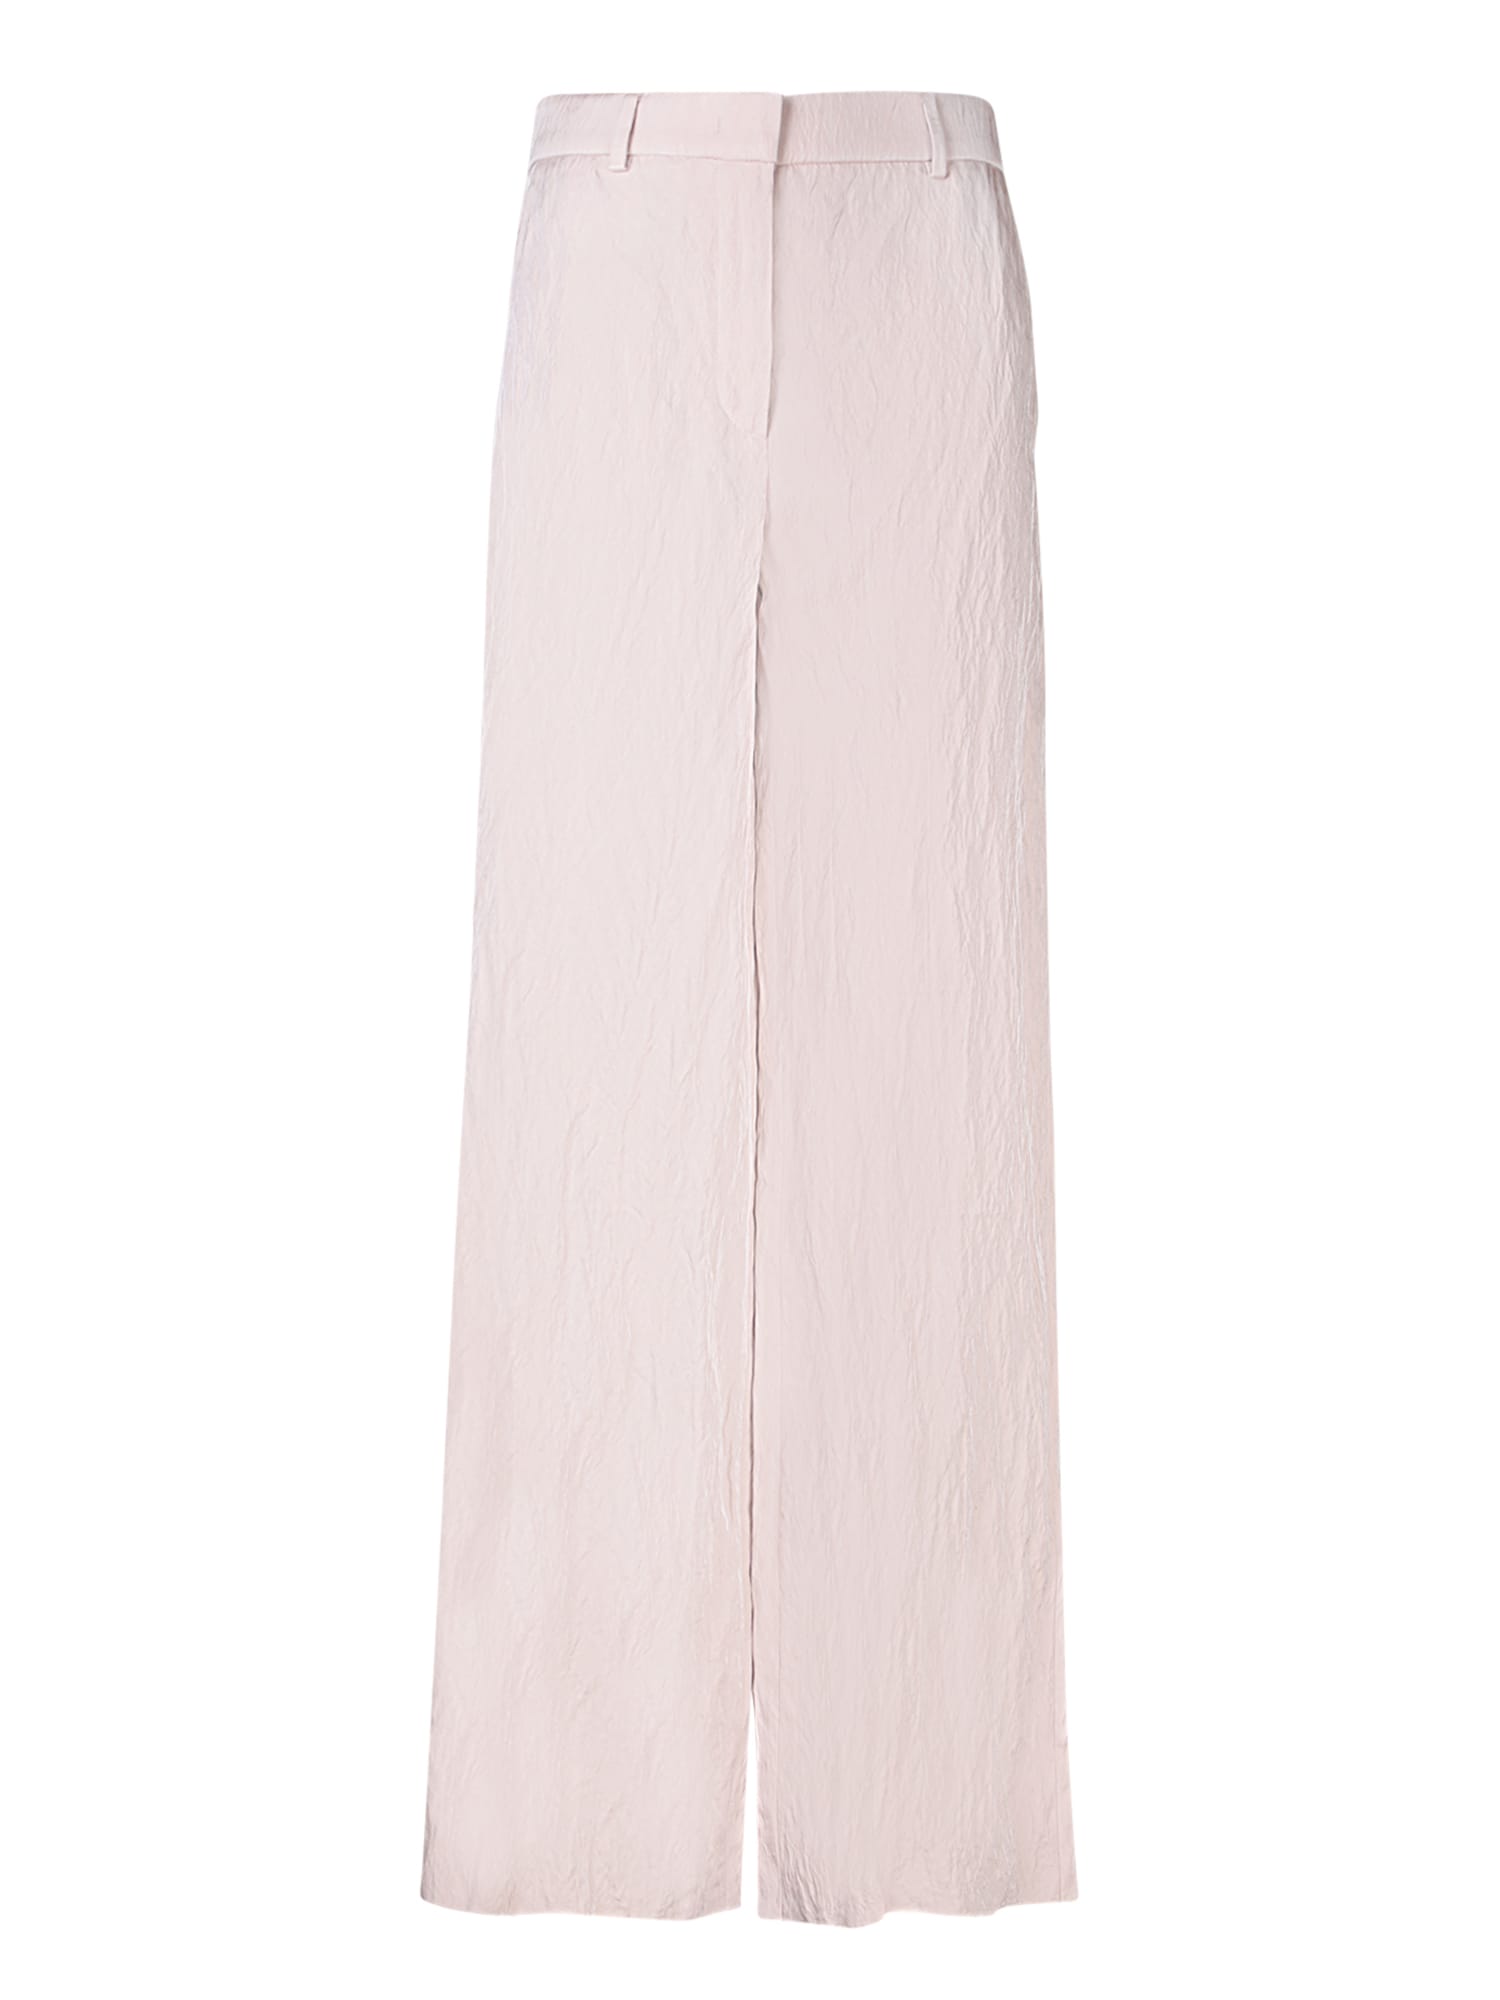 Giorgio Armani Crinkled Viscose And Cotton Trousers In Powder Pink By